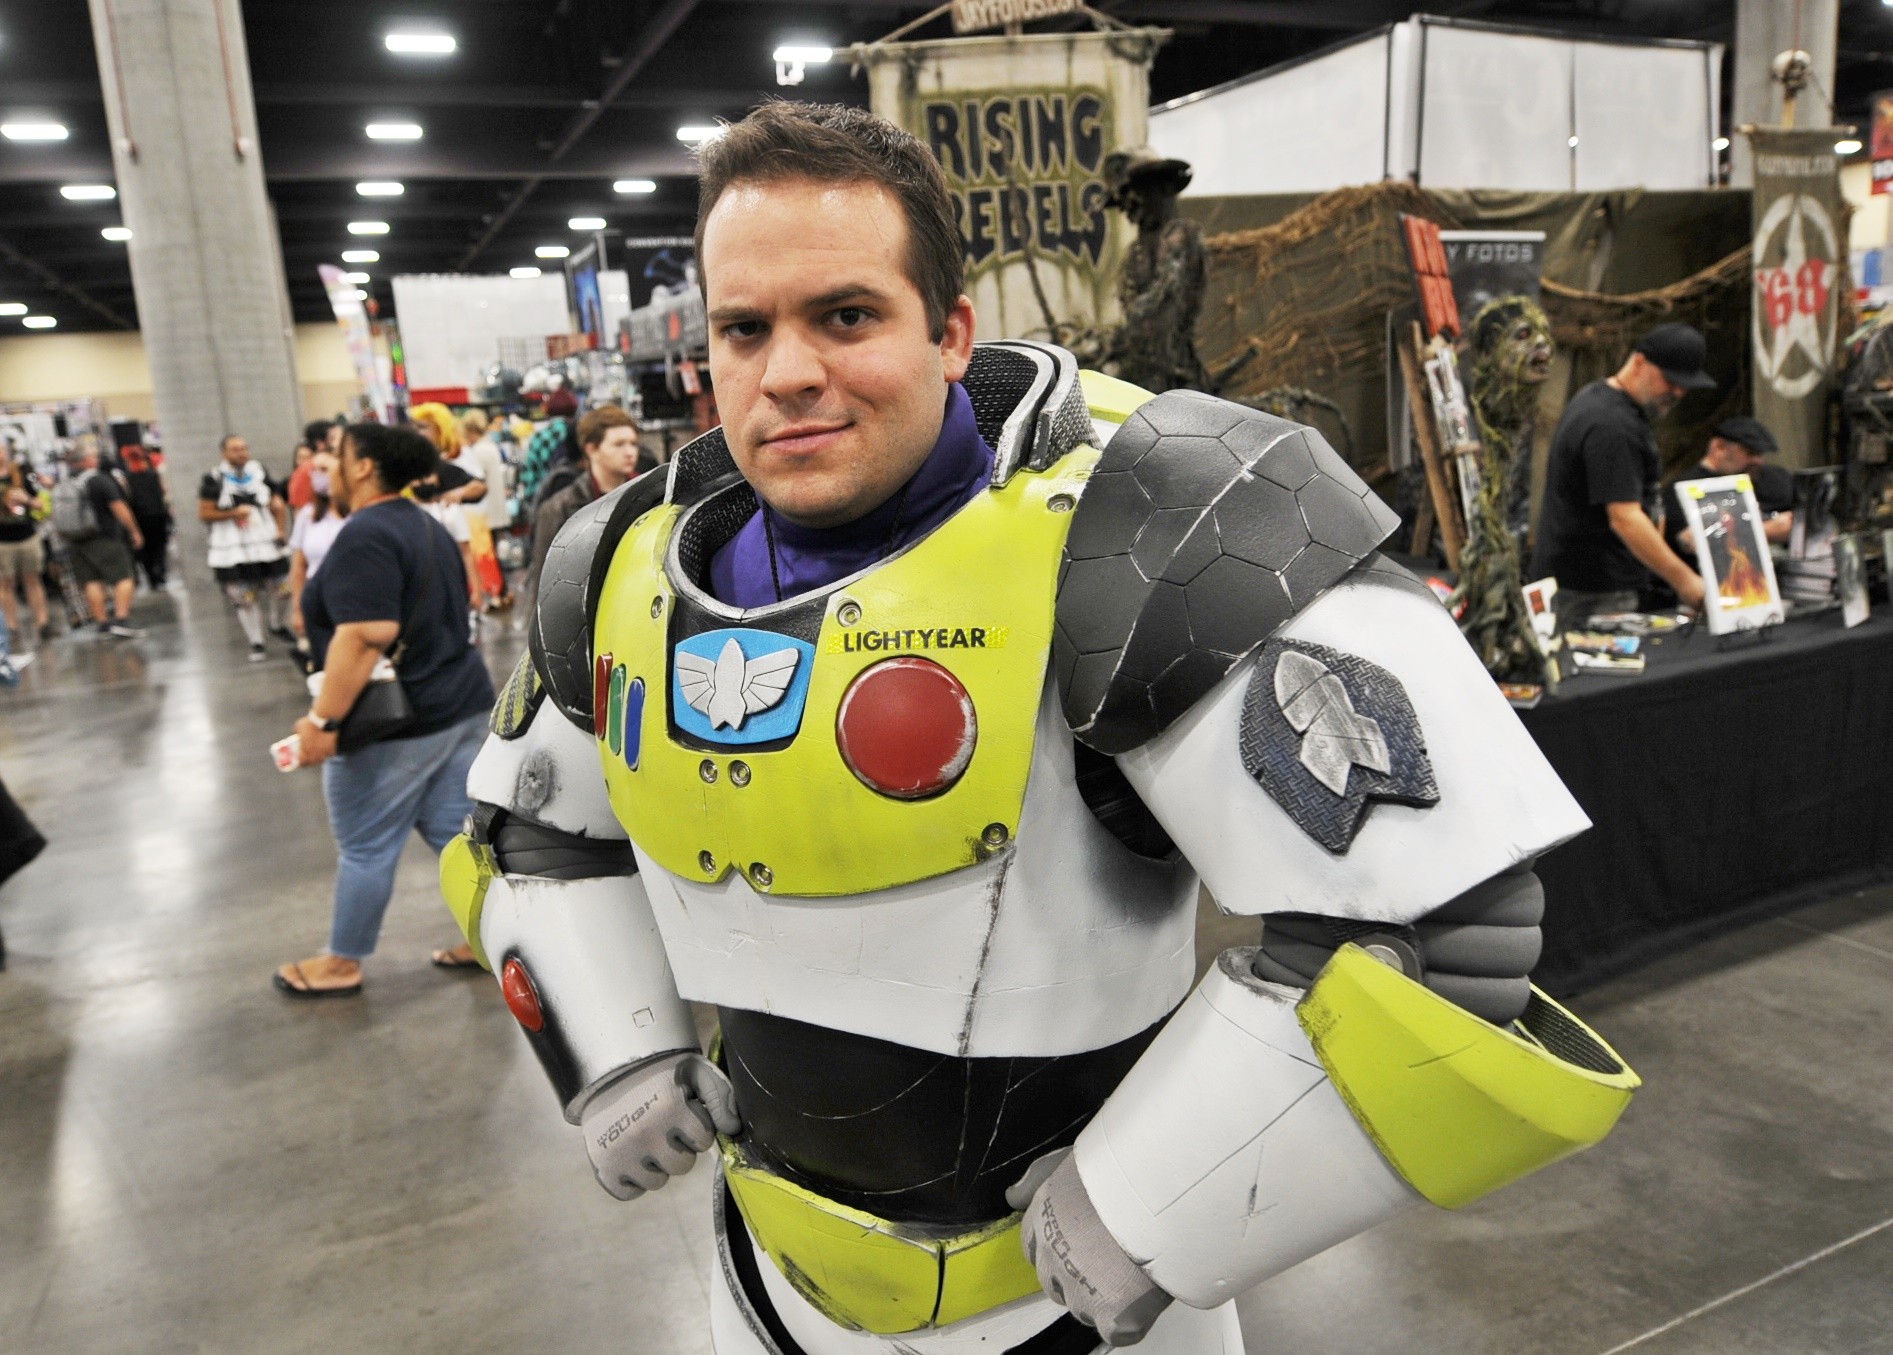 Phoenix anime fans can take part in cosplay, collectible outdoor event